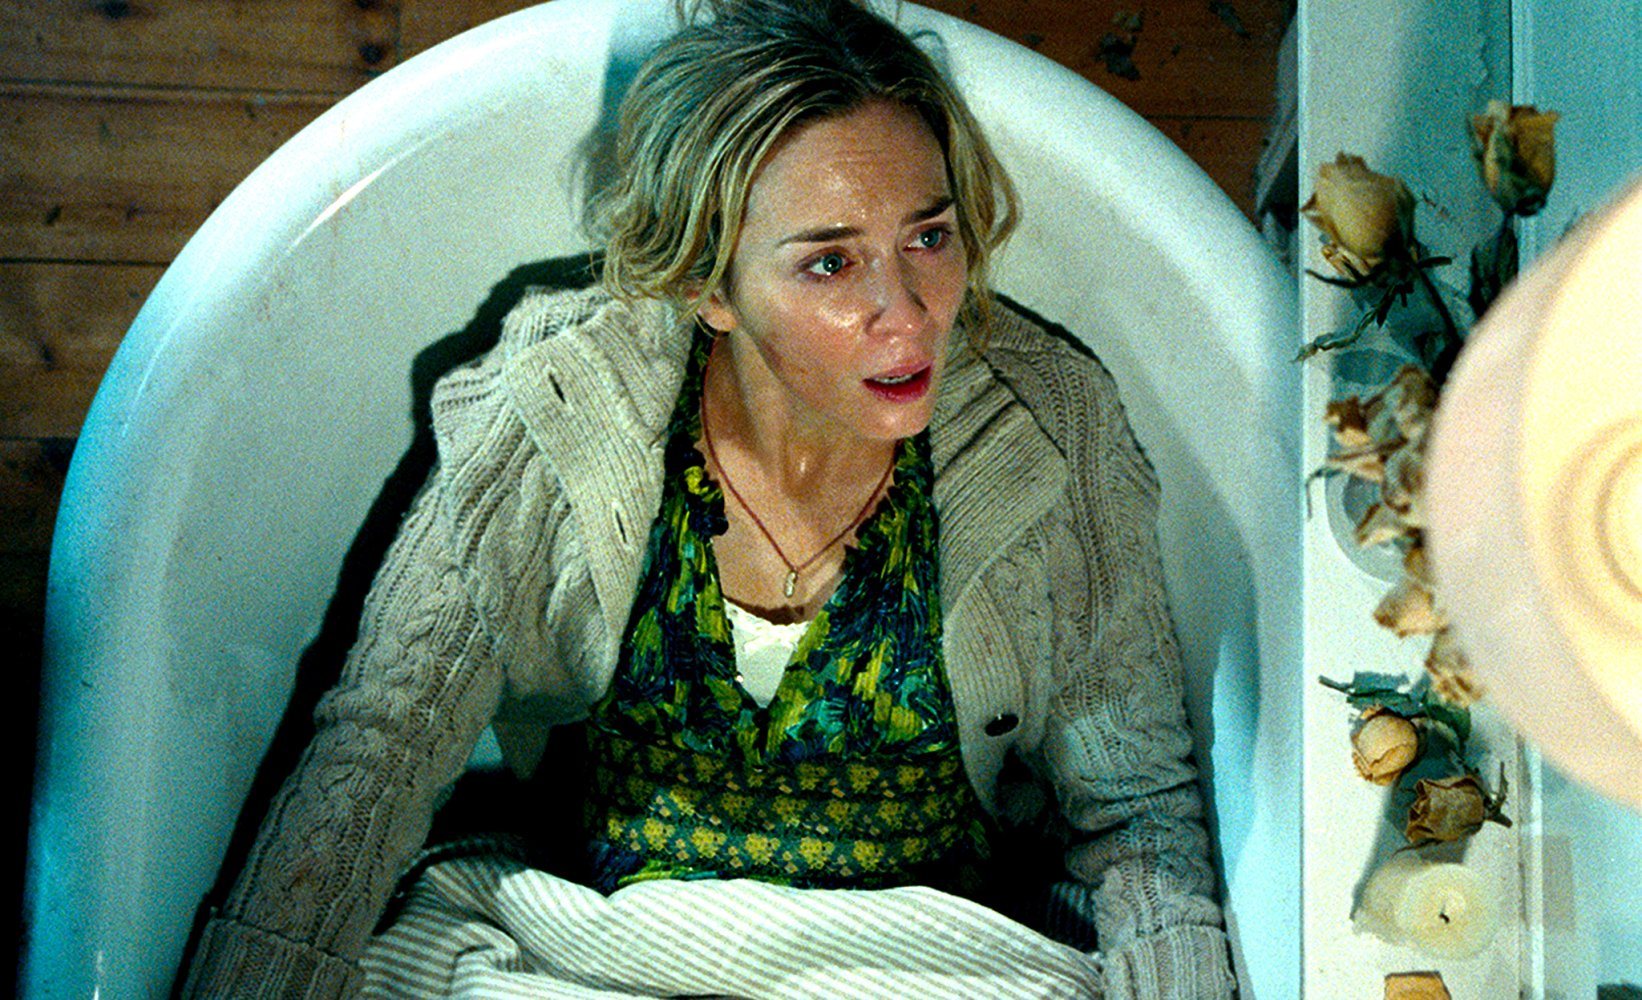 Emily Blunt in 'A Quiet Place'.